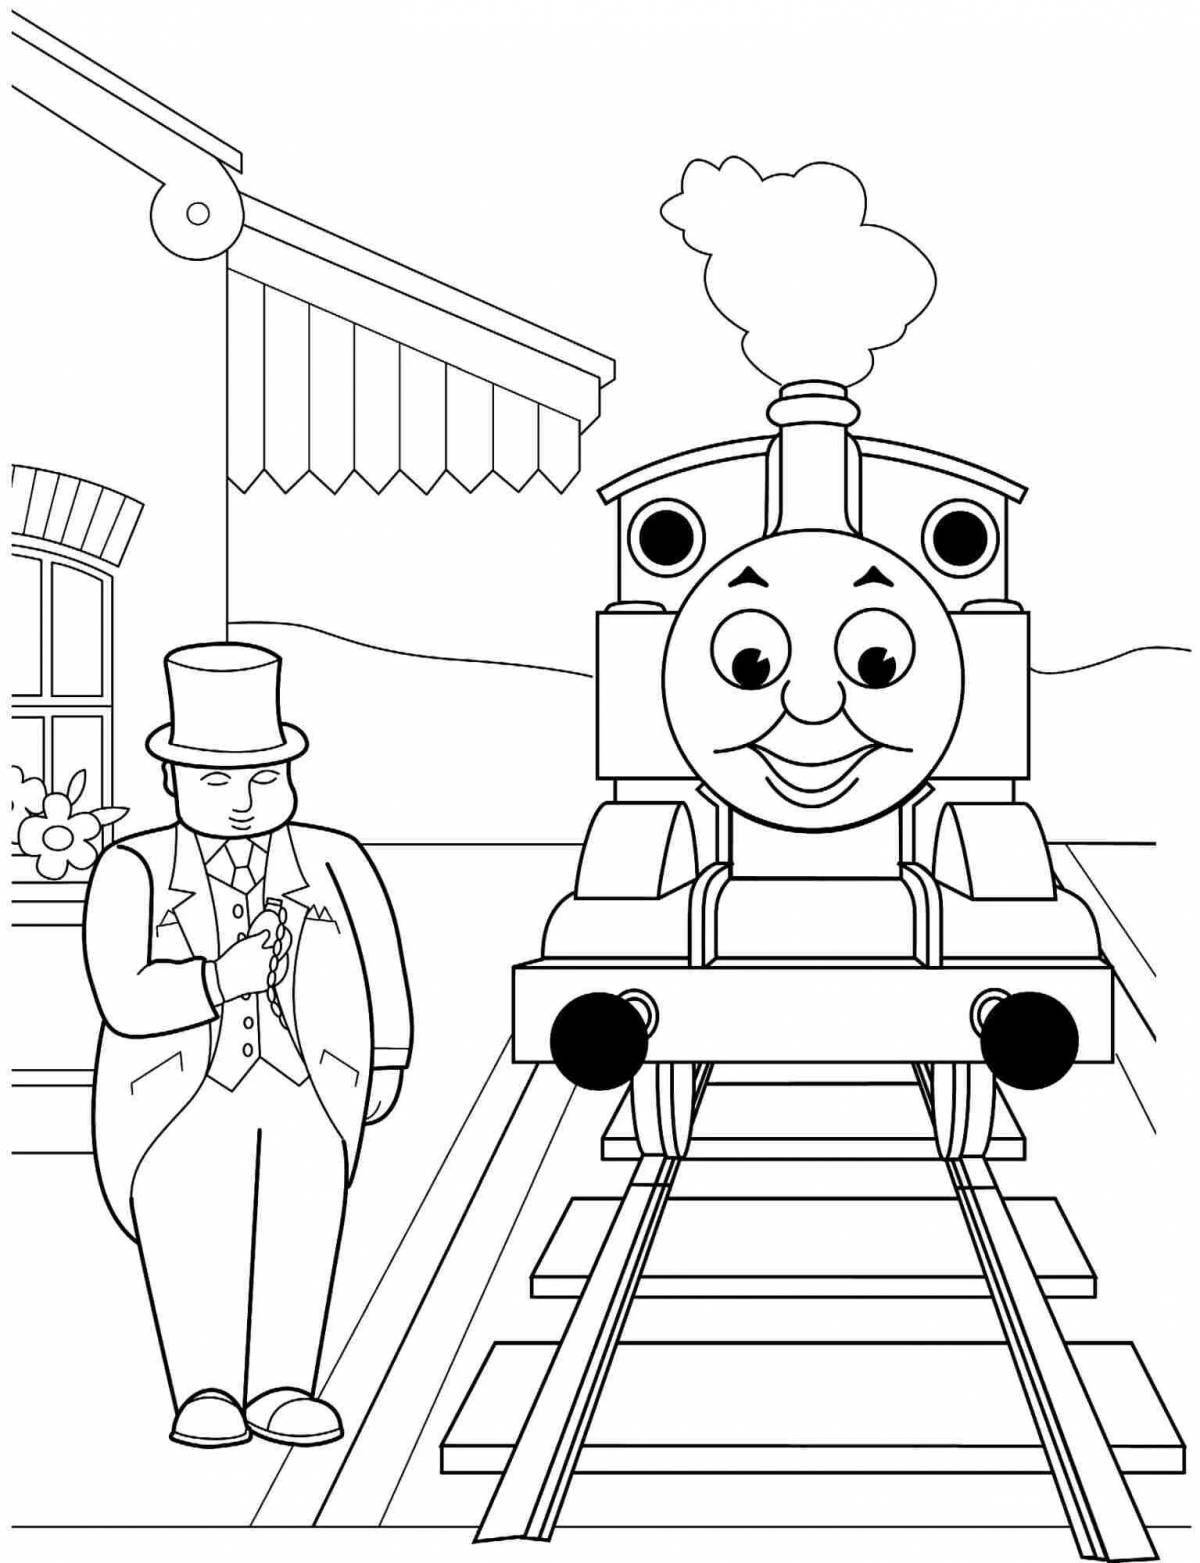 Rail safety coloring page